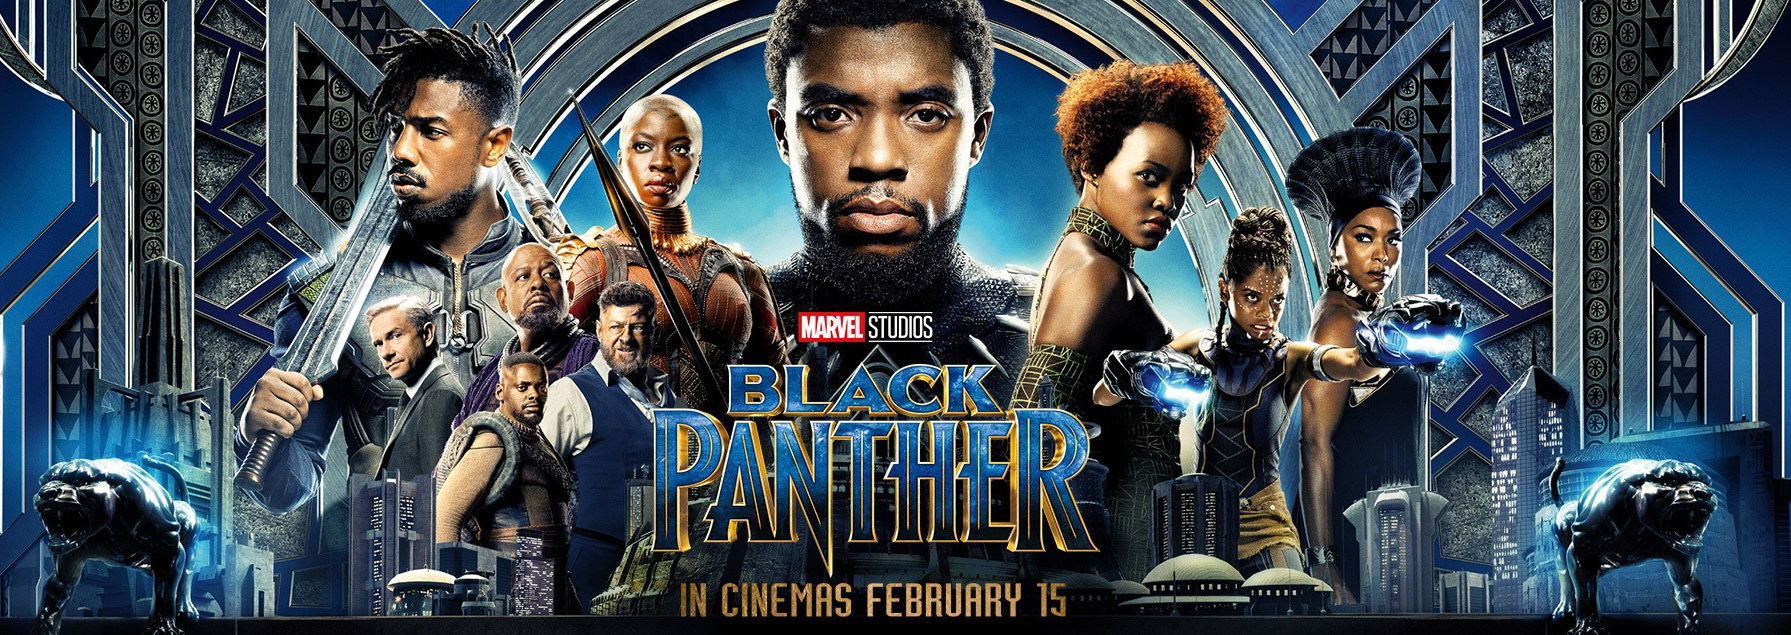 ‘Black Panther’ Fuels All-Time Record Breaking February Box Office